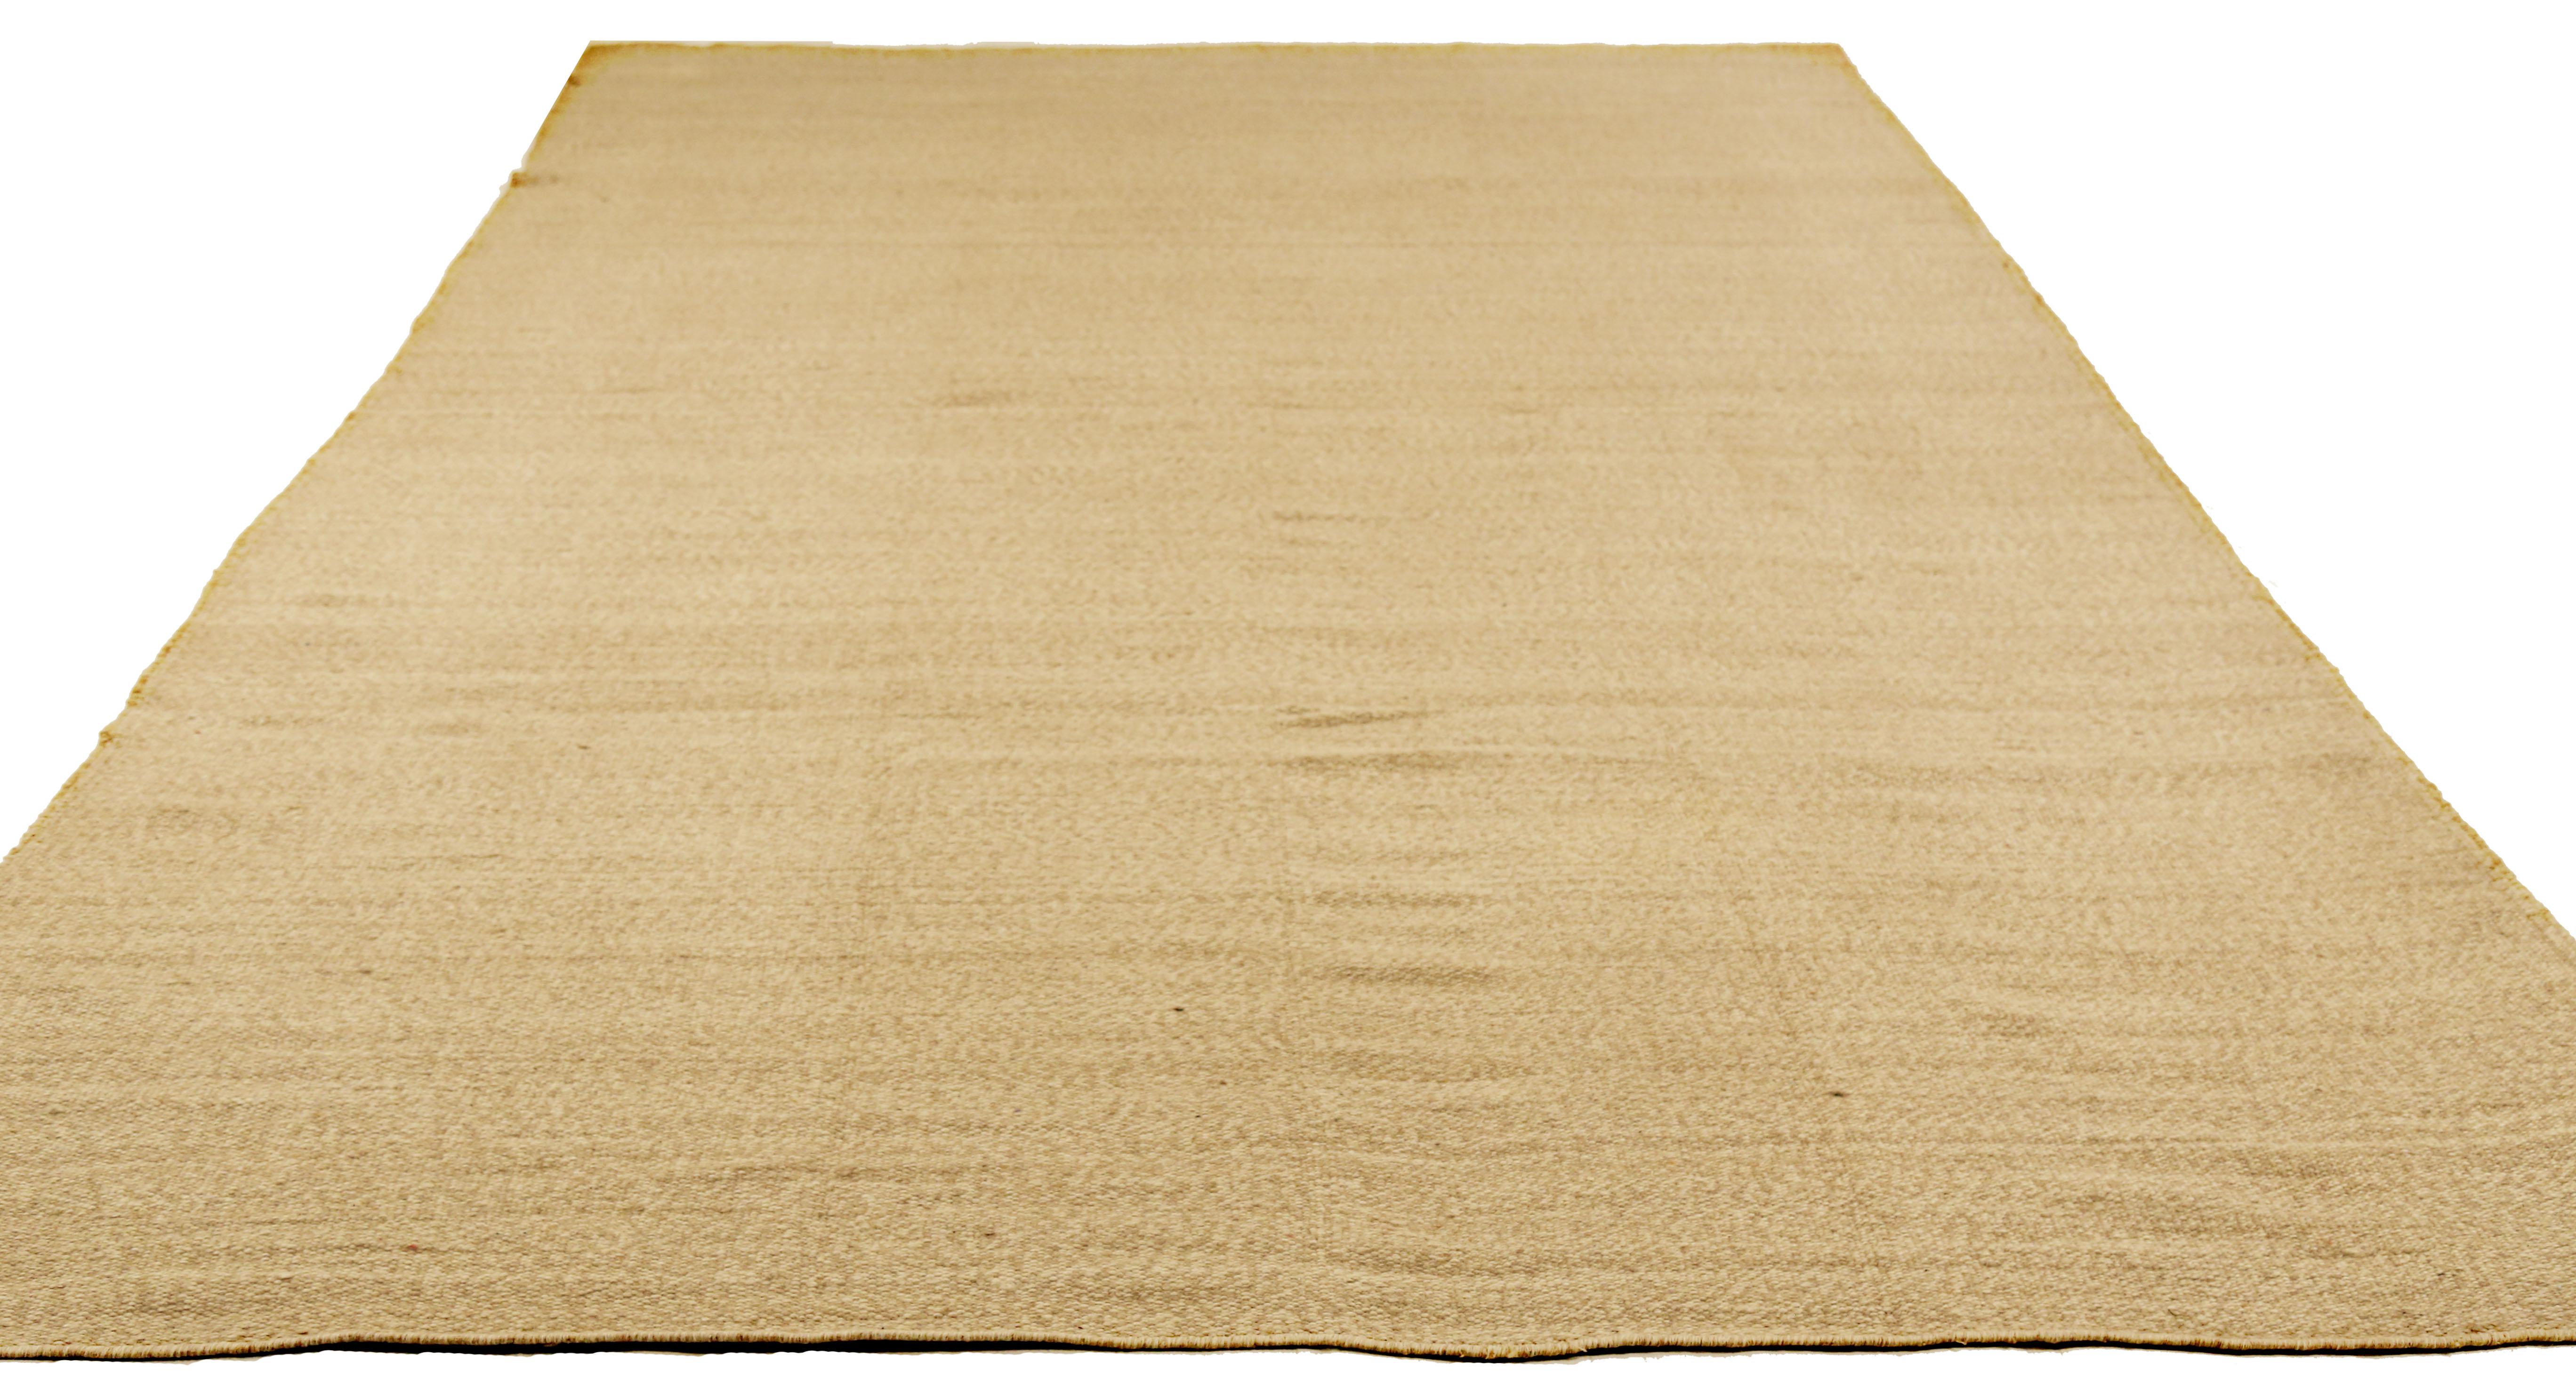 Modern Turkish rug handwoven from the finest sheep’s wool and colored with all-natural vegetable dyes that are safe for humans and pets. It’s a traditional Kilim flat-weave design featuring brown lines on an ivory field. It’s a stunning piece to get